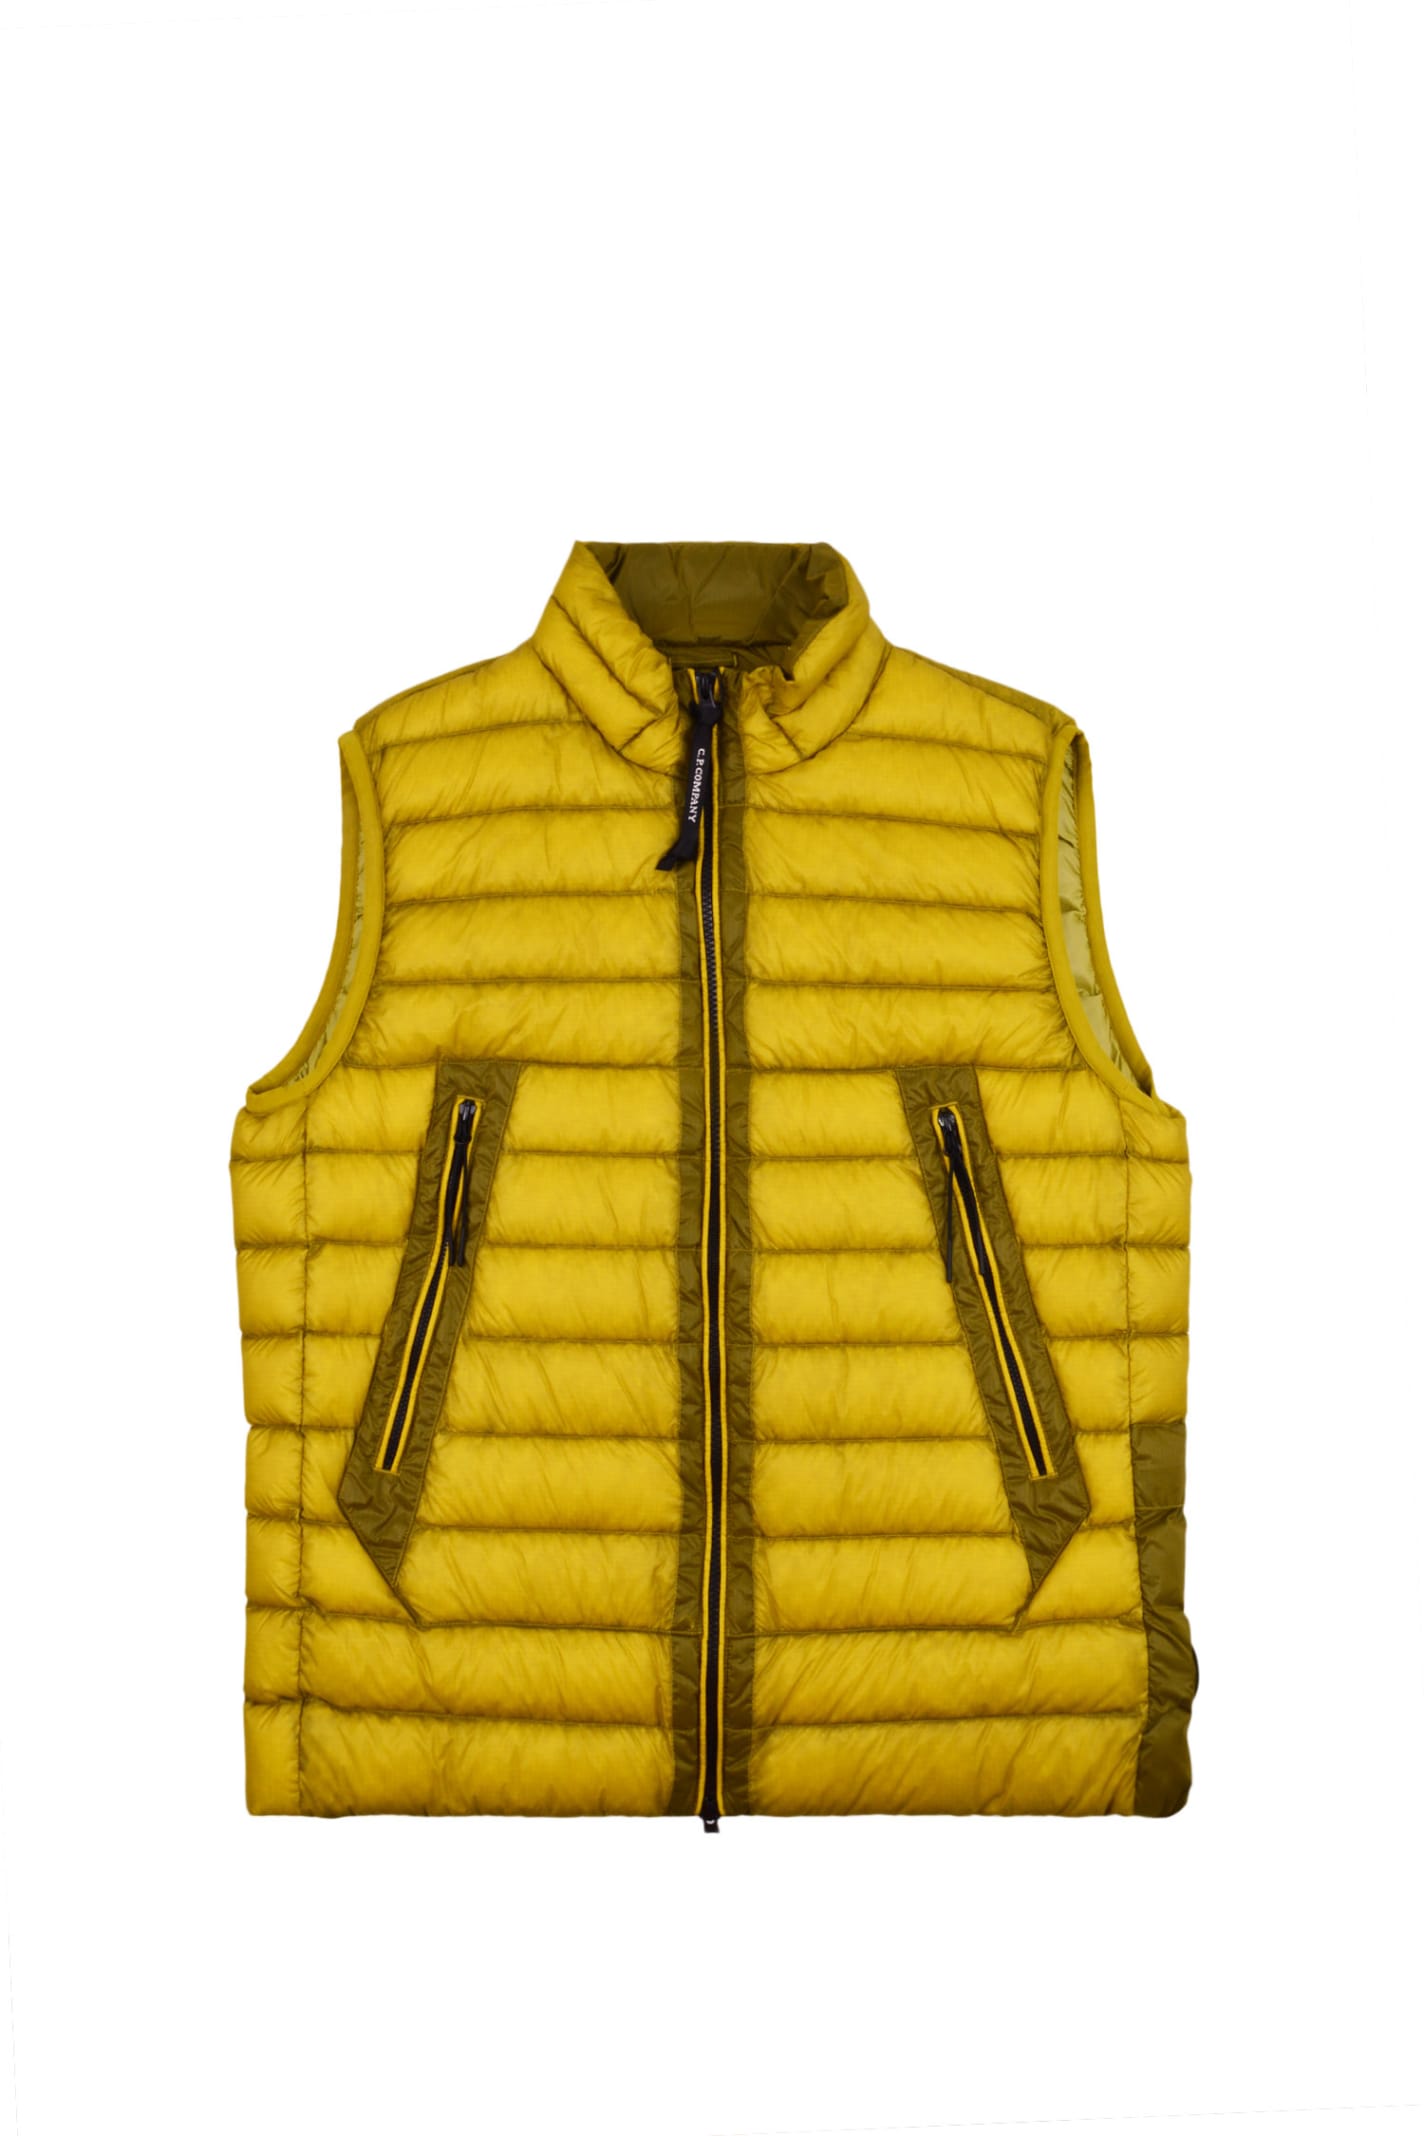 C.P. Company Vest With Contrasting Details